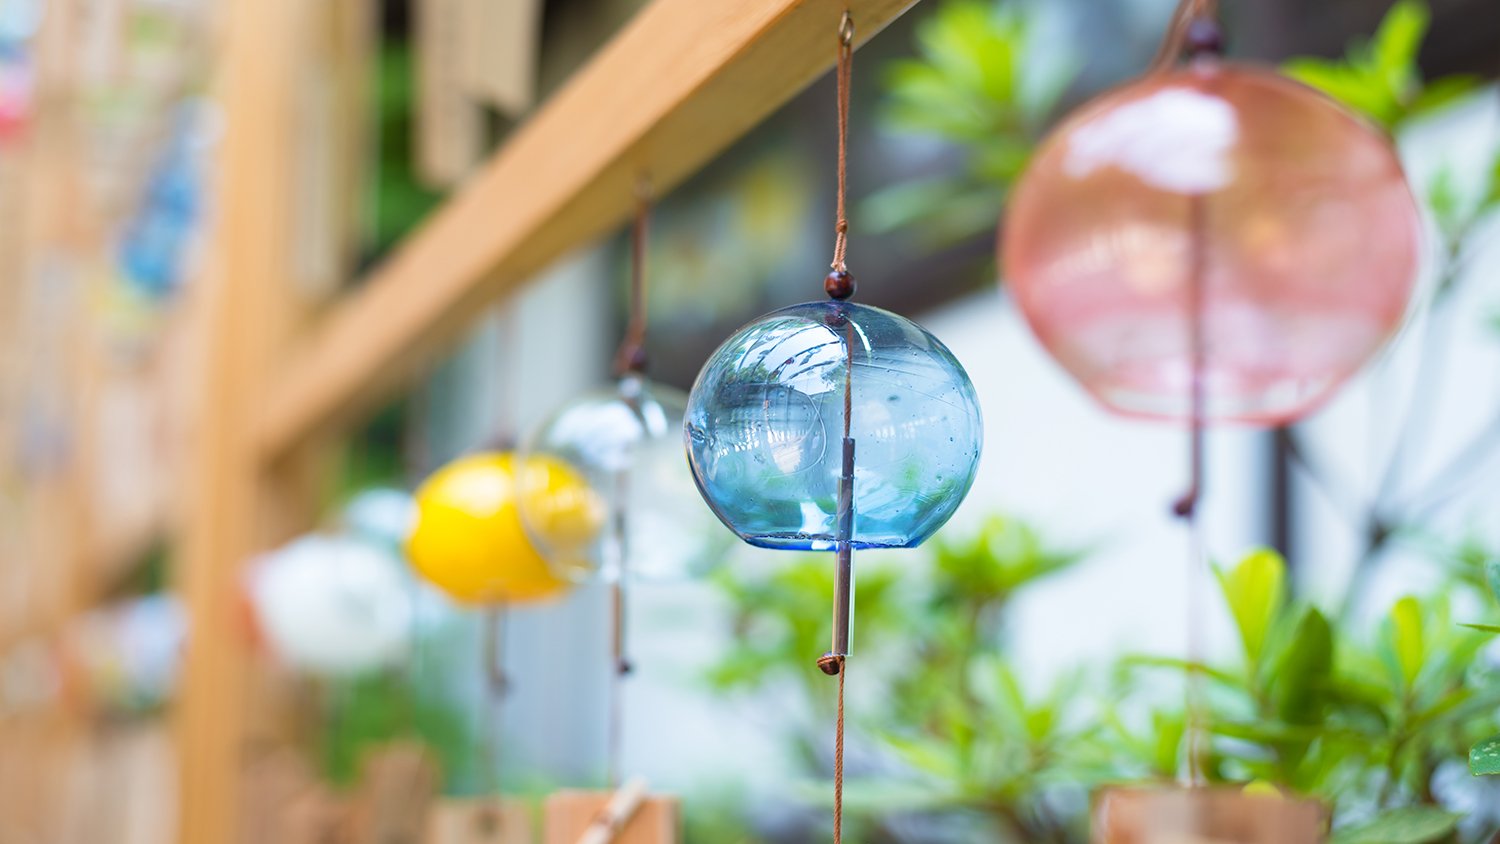 Best Wind Chimes To Brighten Up Your Deck or Backyard